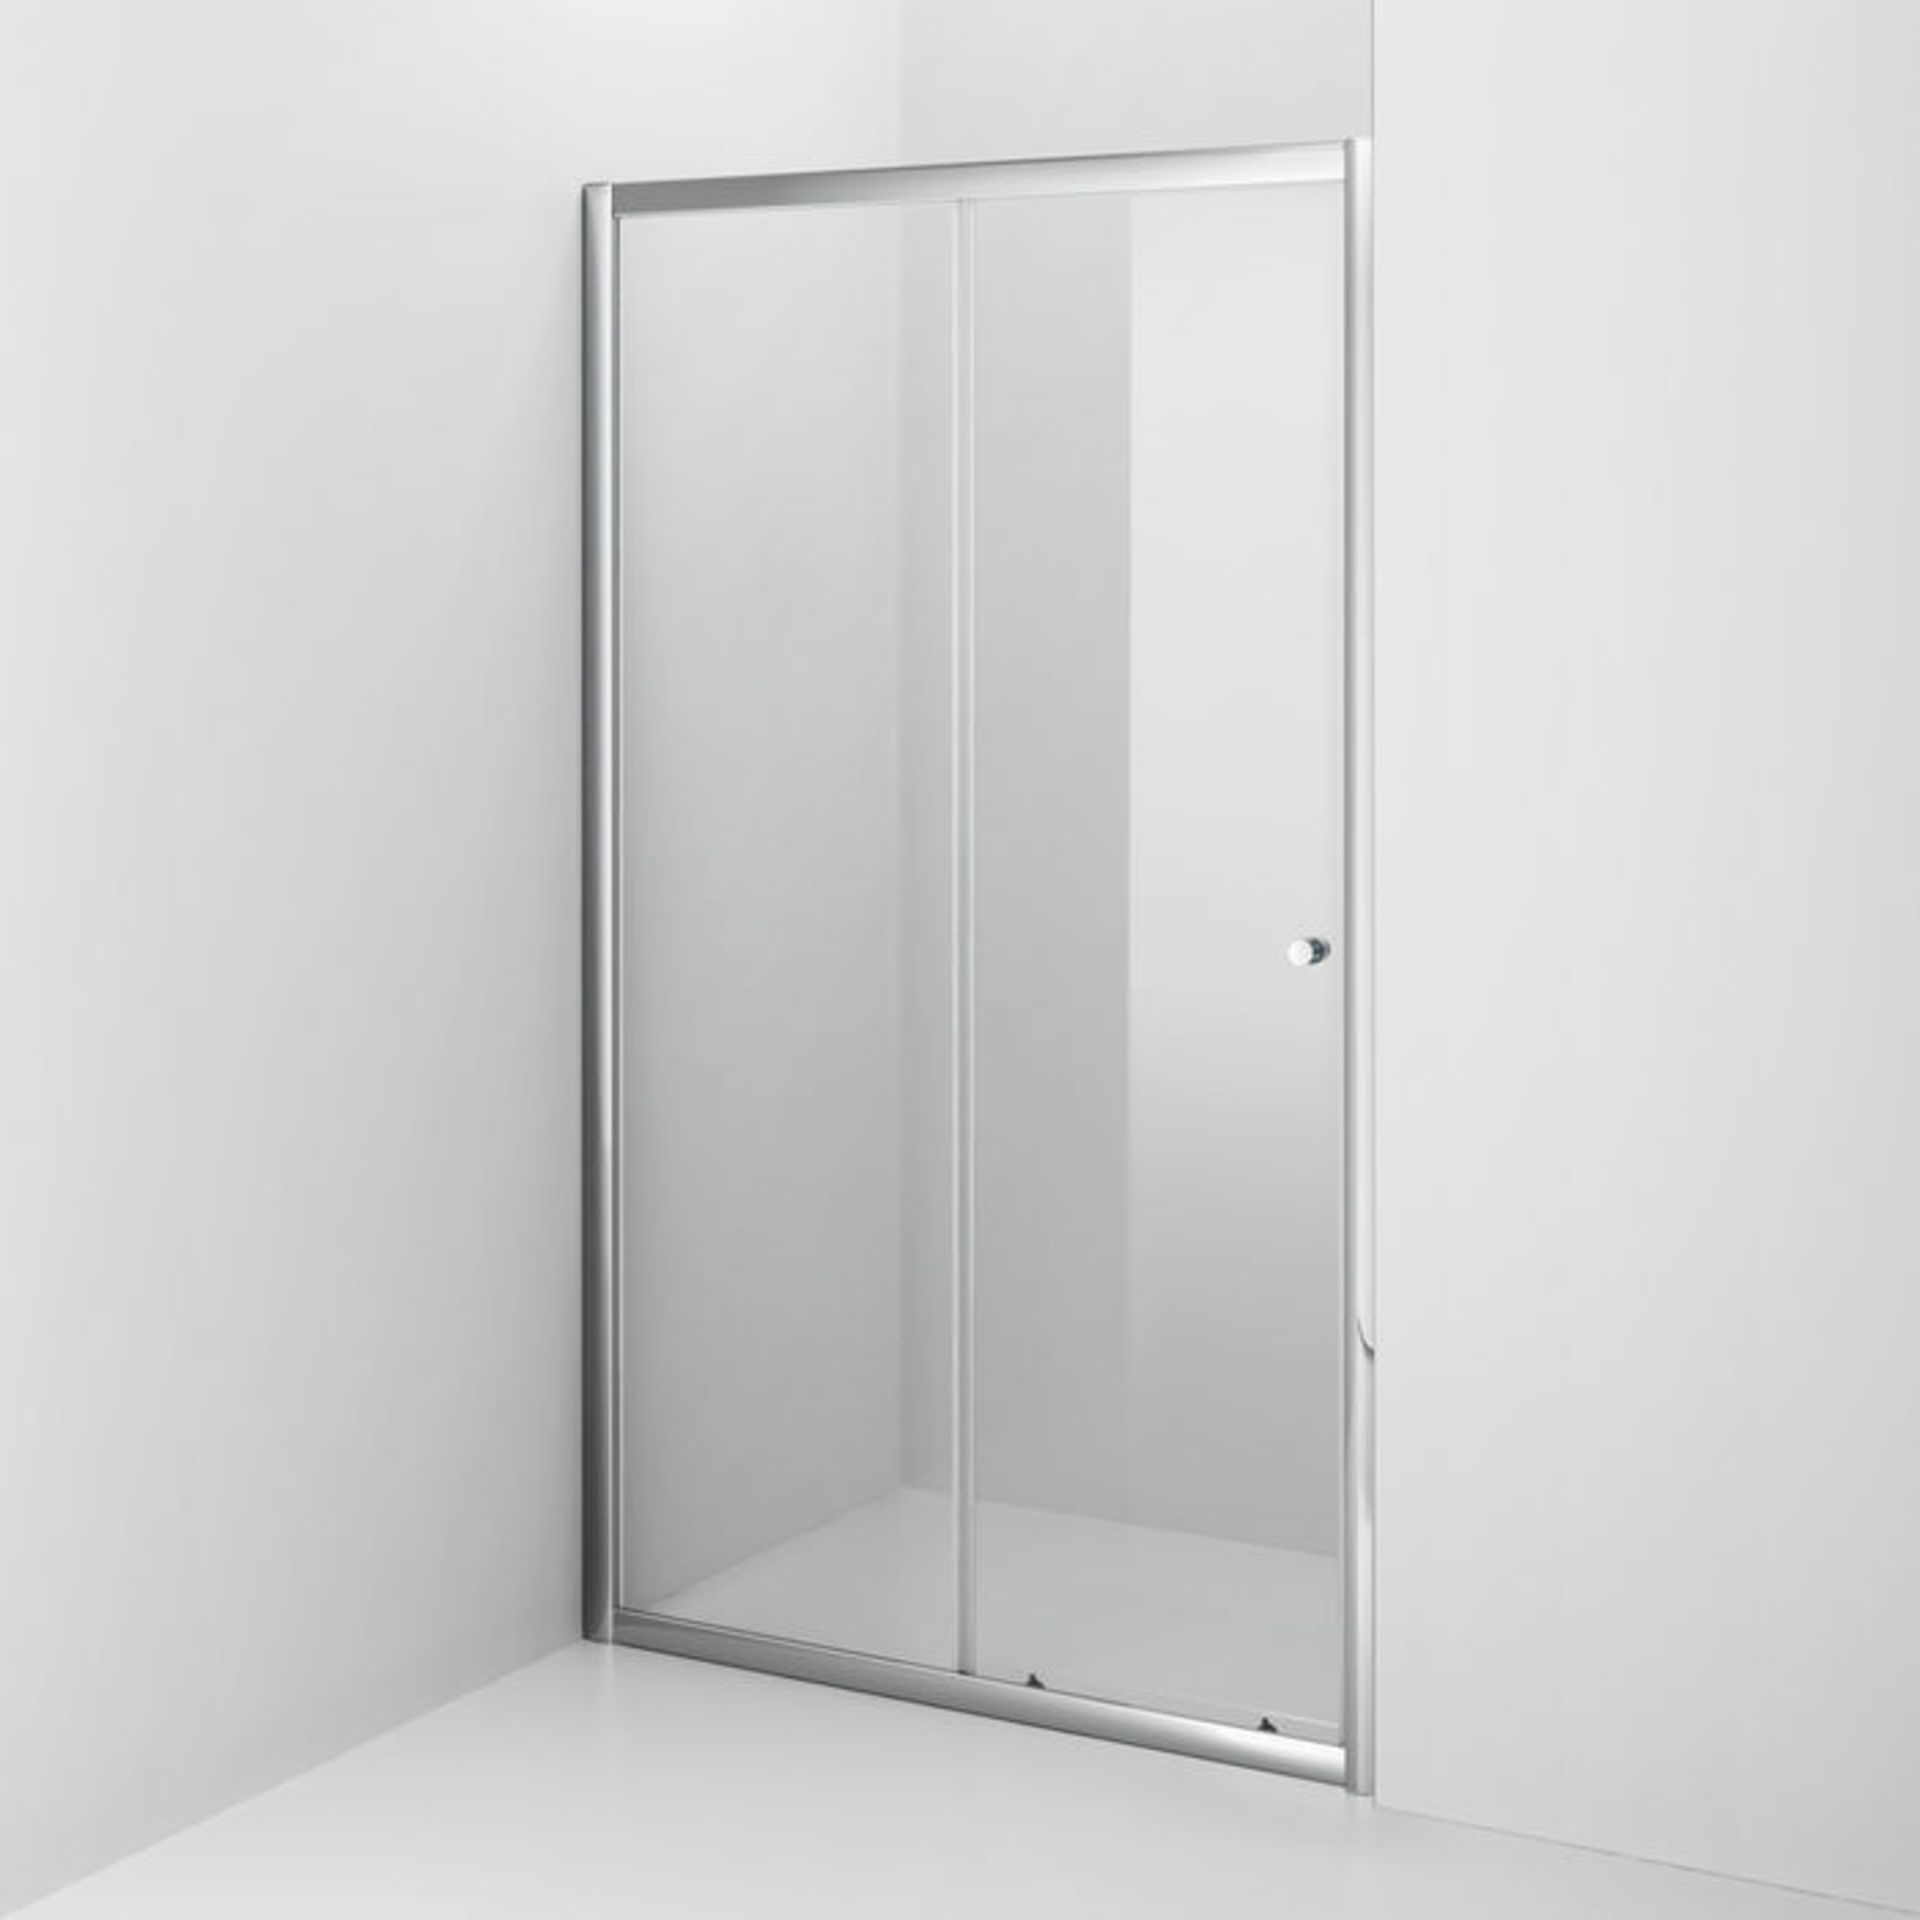 NEW Twyfords 1200mm - Elements Sliding Shower Door. RRP £399.99.4mm Safety Glass Fully waterpr... - Image 2 of 2